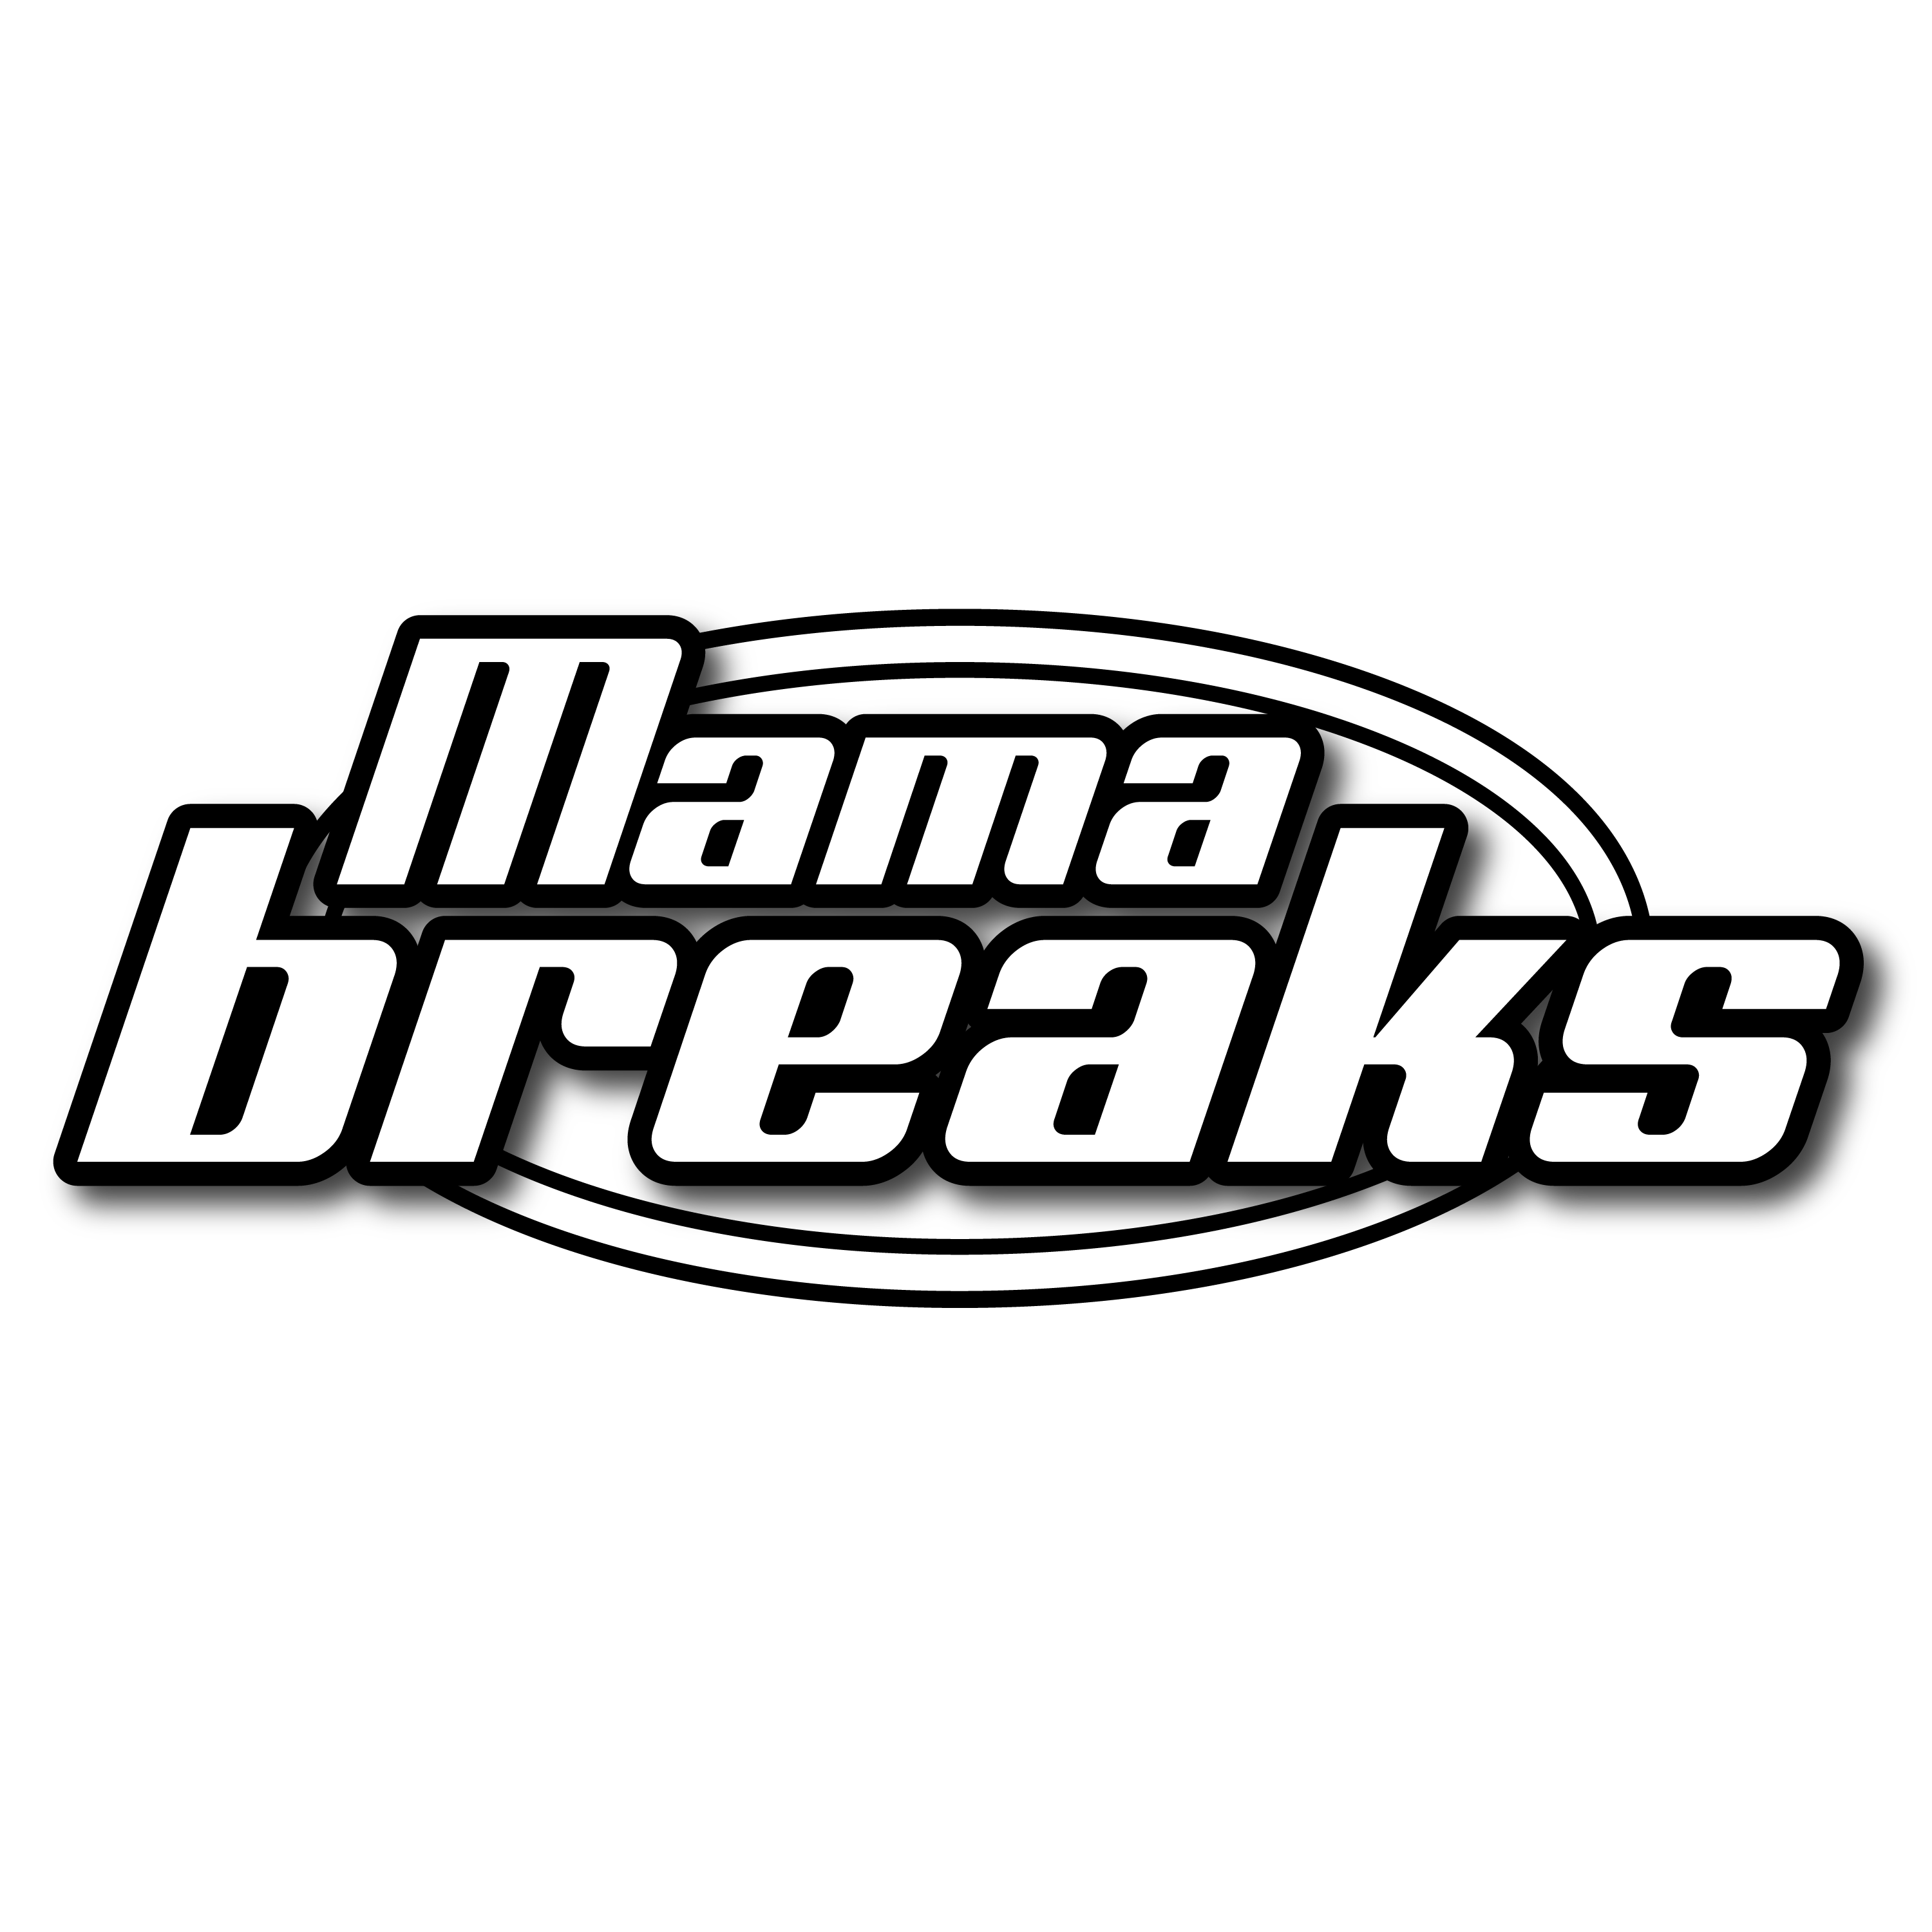 Mamabreaks | Live Box and Case Sports & Star Wars Card Breaks